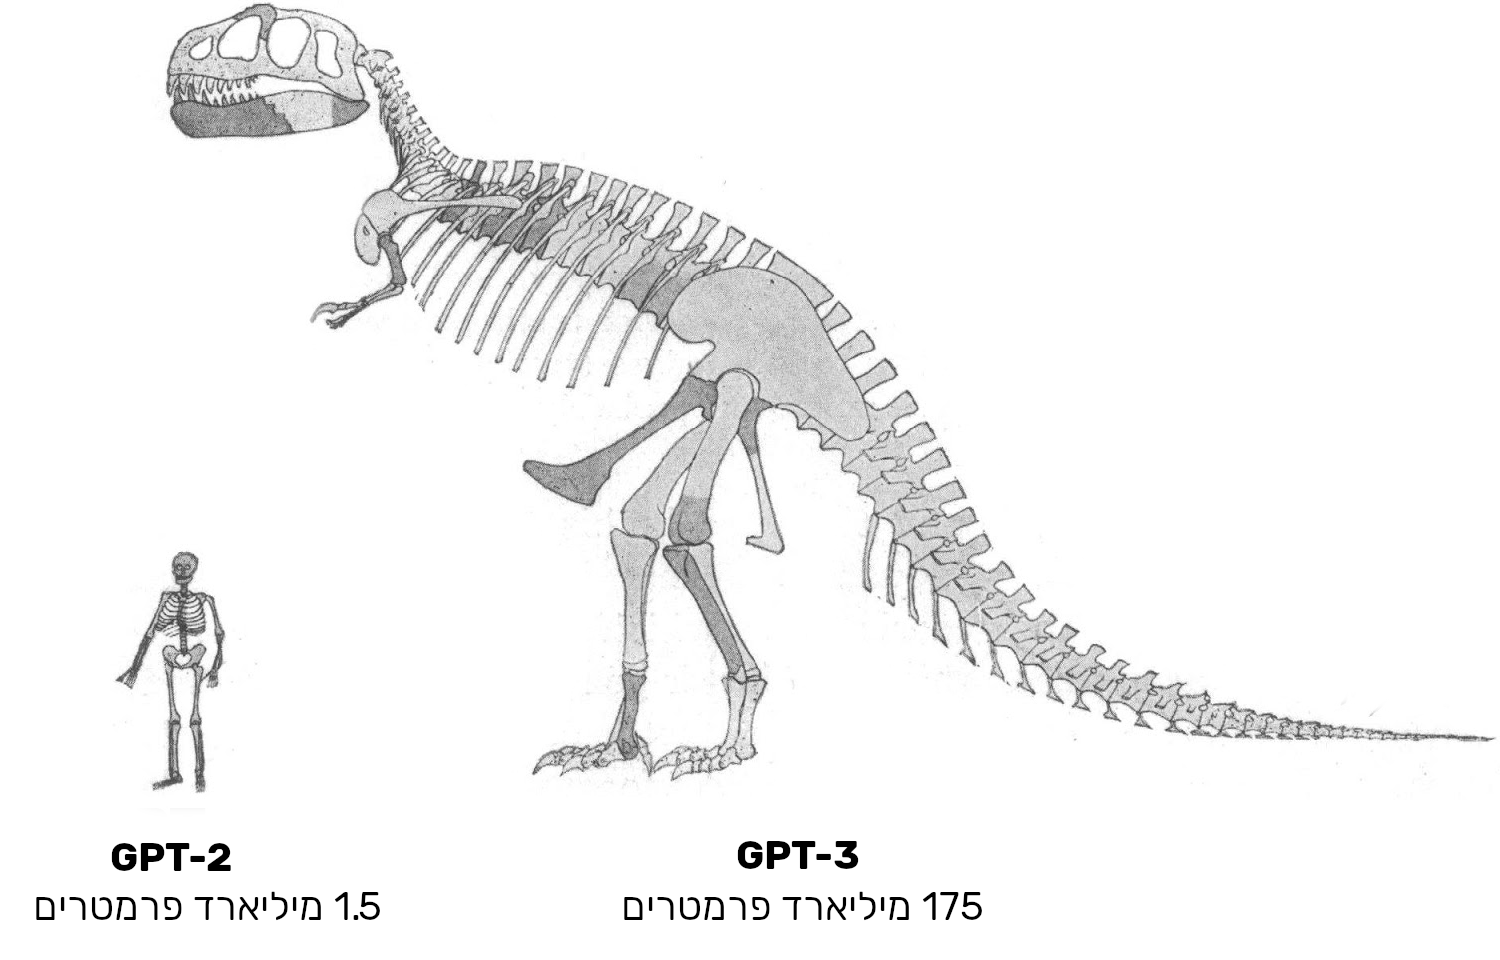 Approximate-size-comparison-of-GPT-2